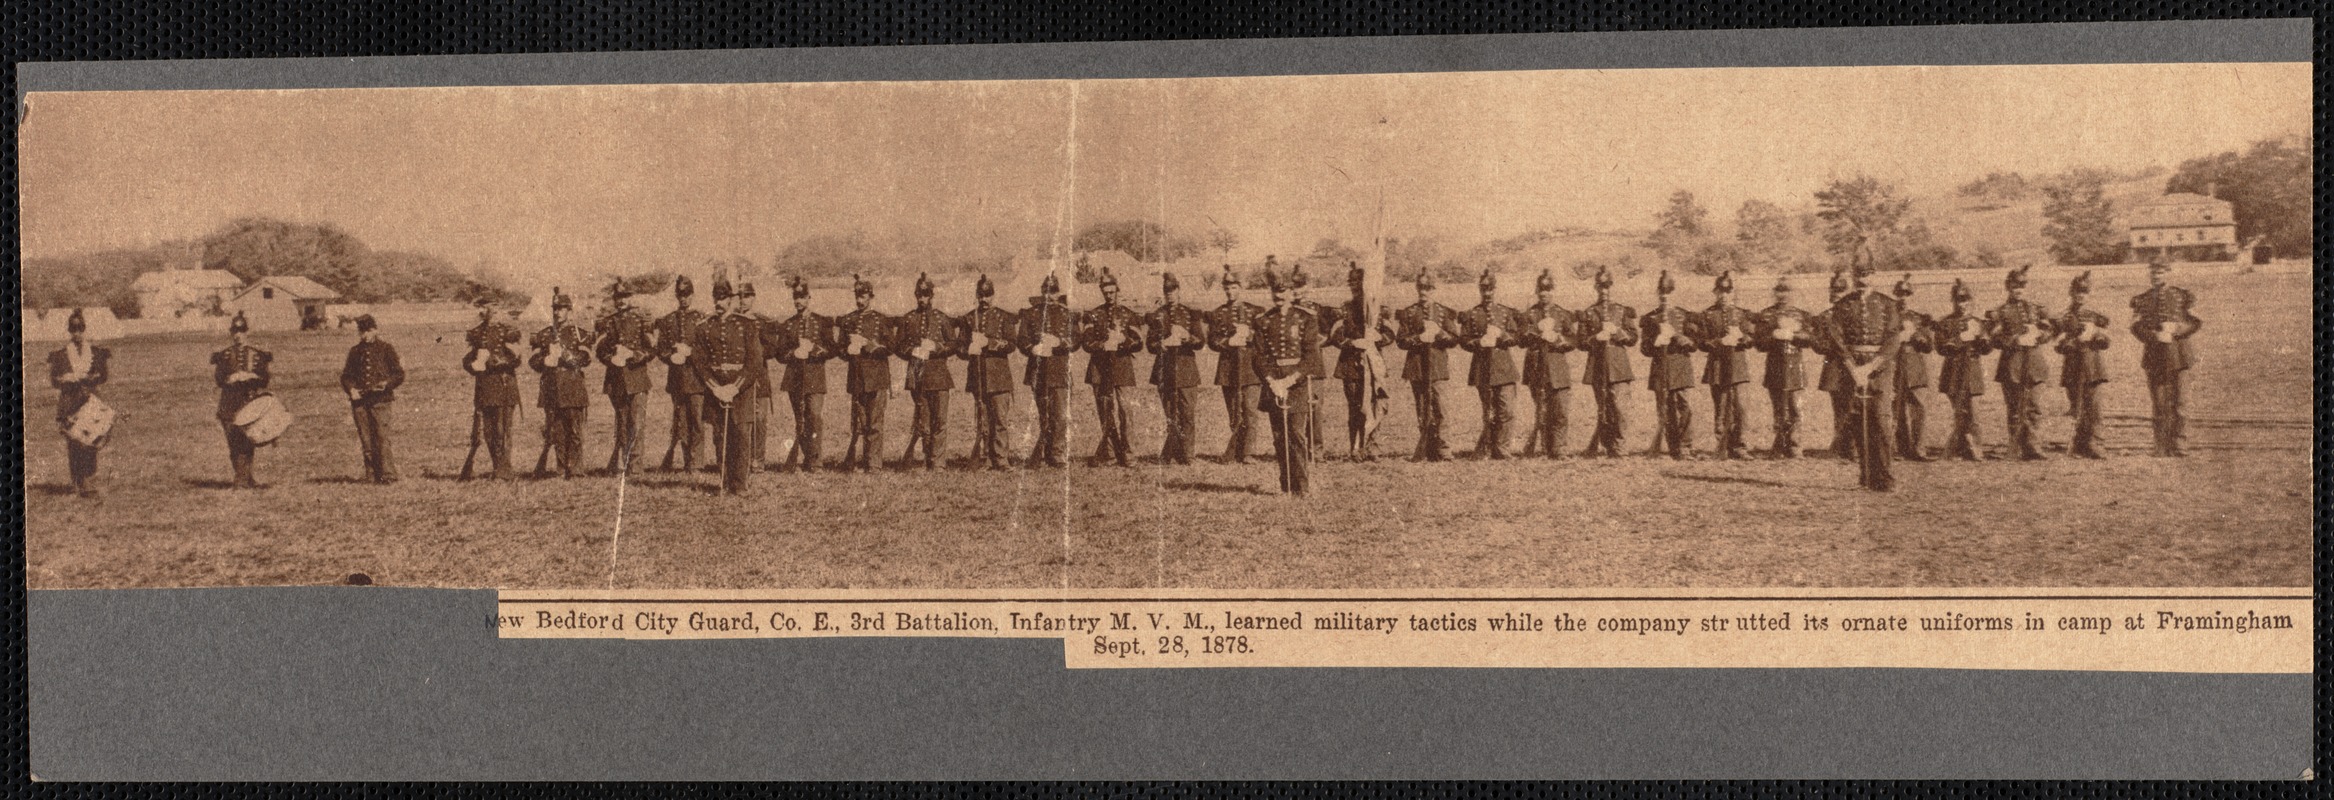 Members of New Bedford City Guard, Company E, 3rd battalion, Infantry M.V.M.